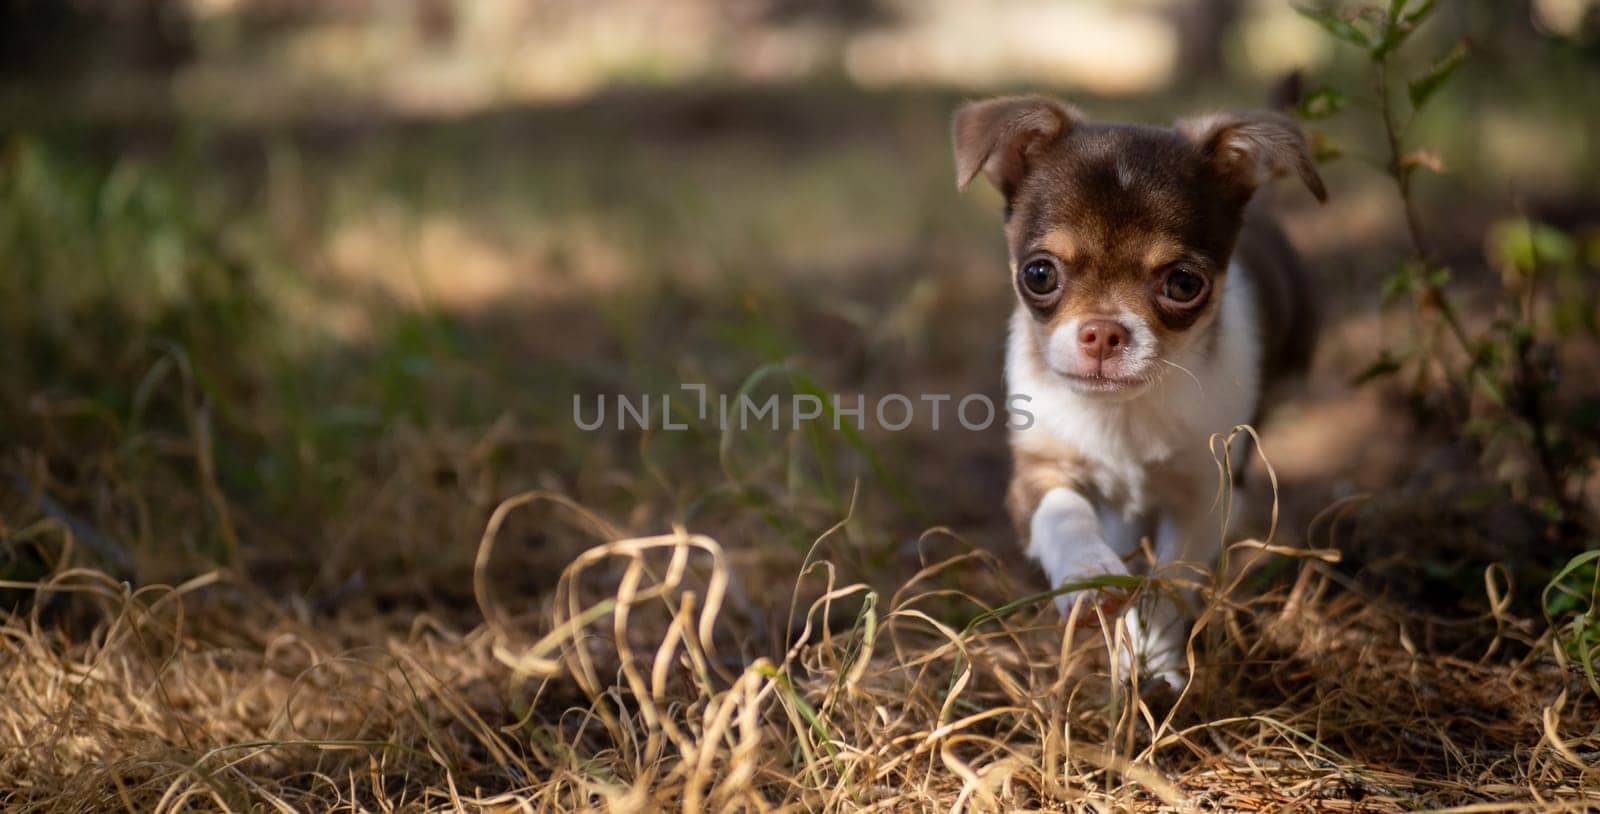 Chihuahua Puppy's Day Out by gcm